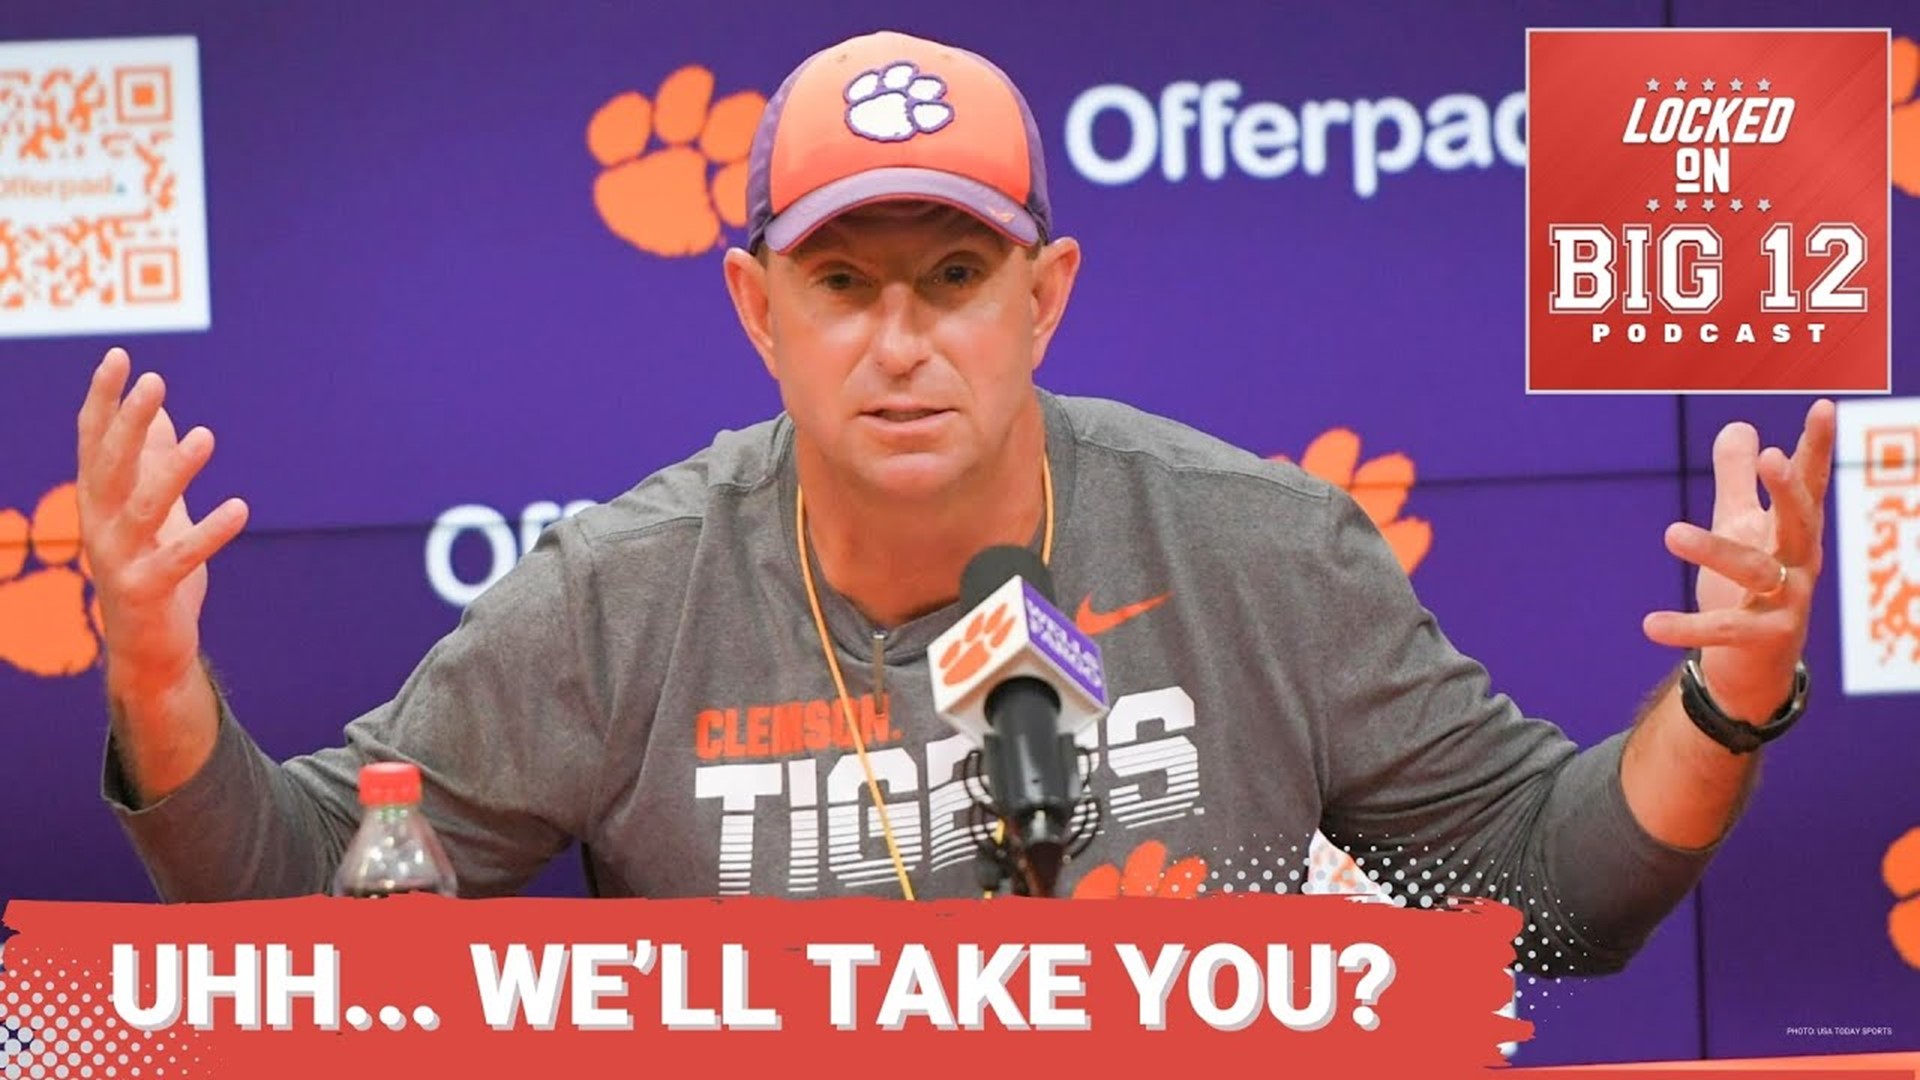 REPORT Clemson, Florida State to Big 12 is Option After Lawsuits to